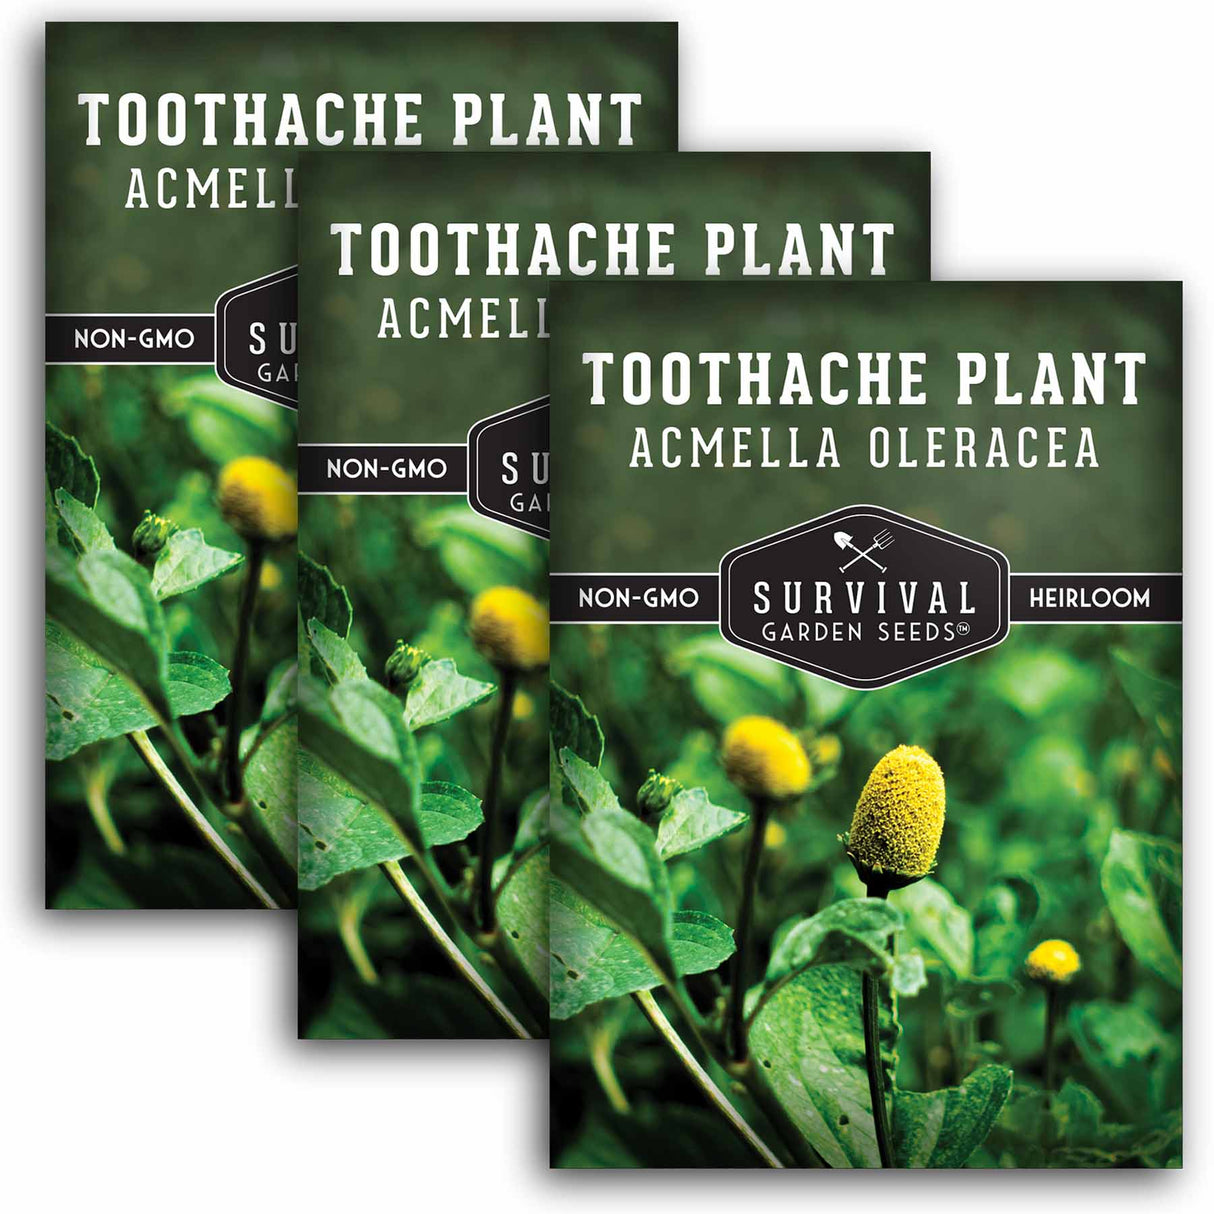 3 packets of Toothache Plant seeds